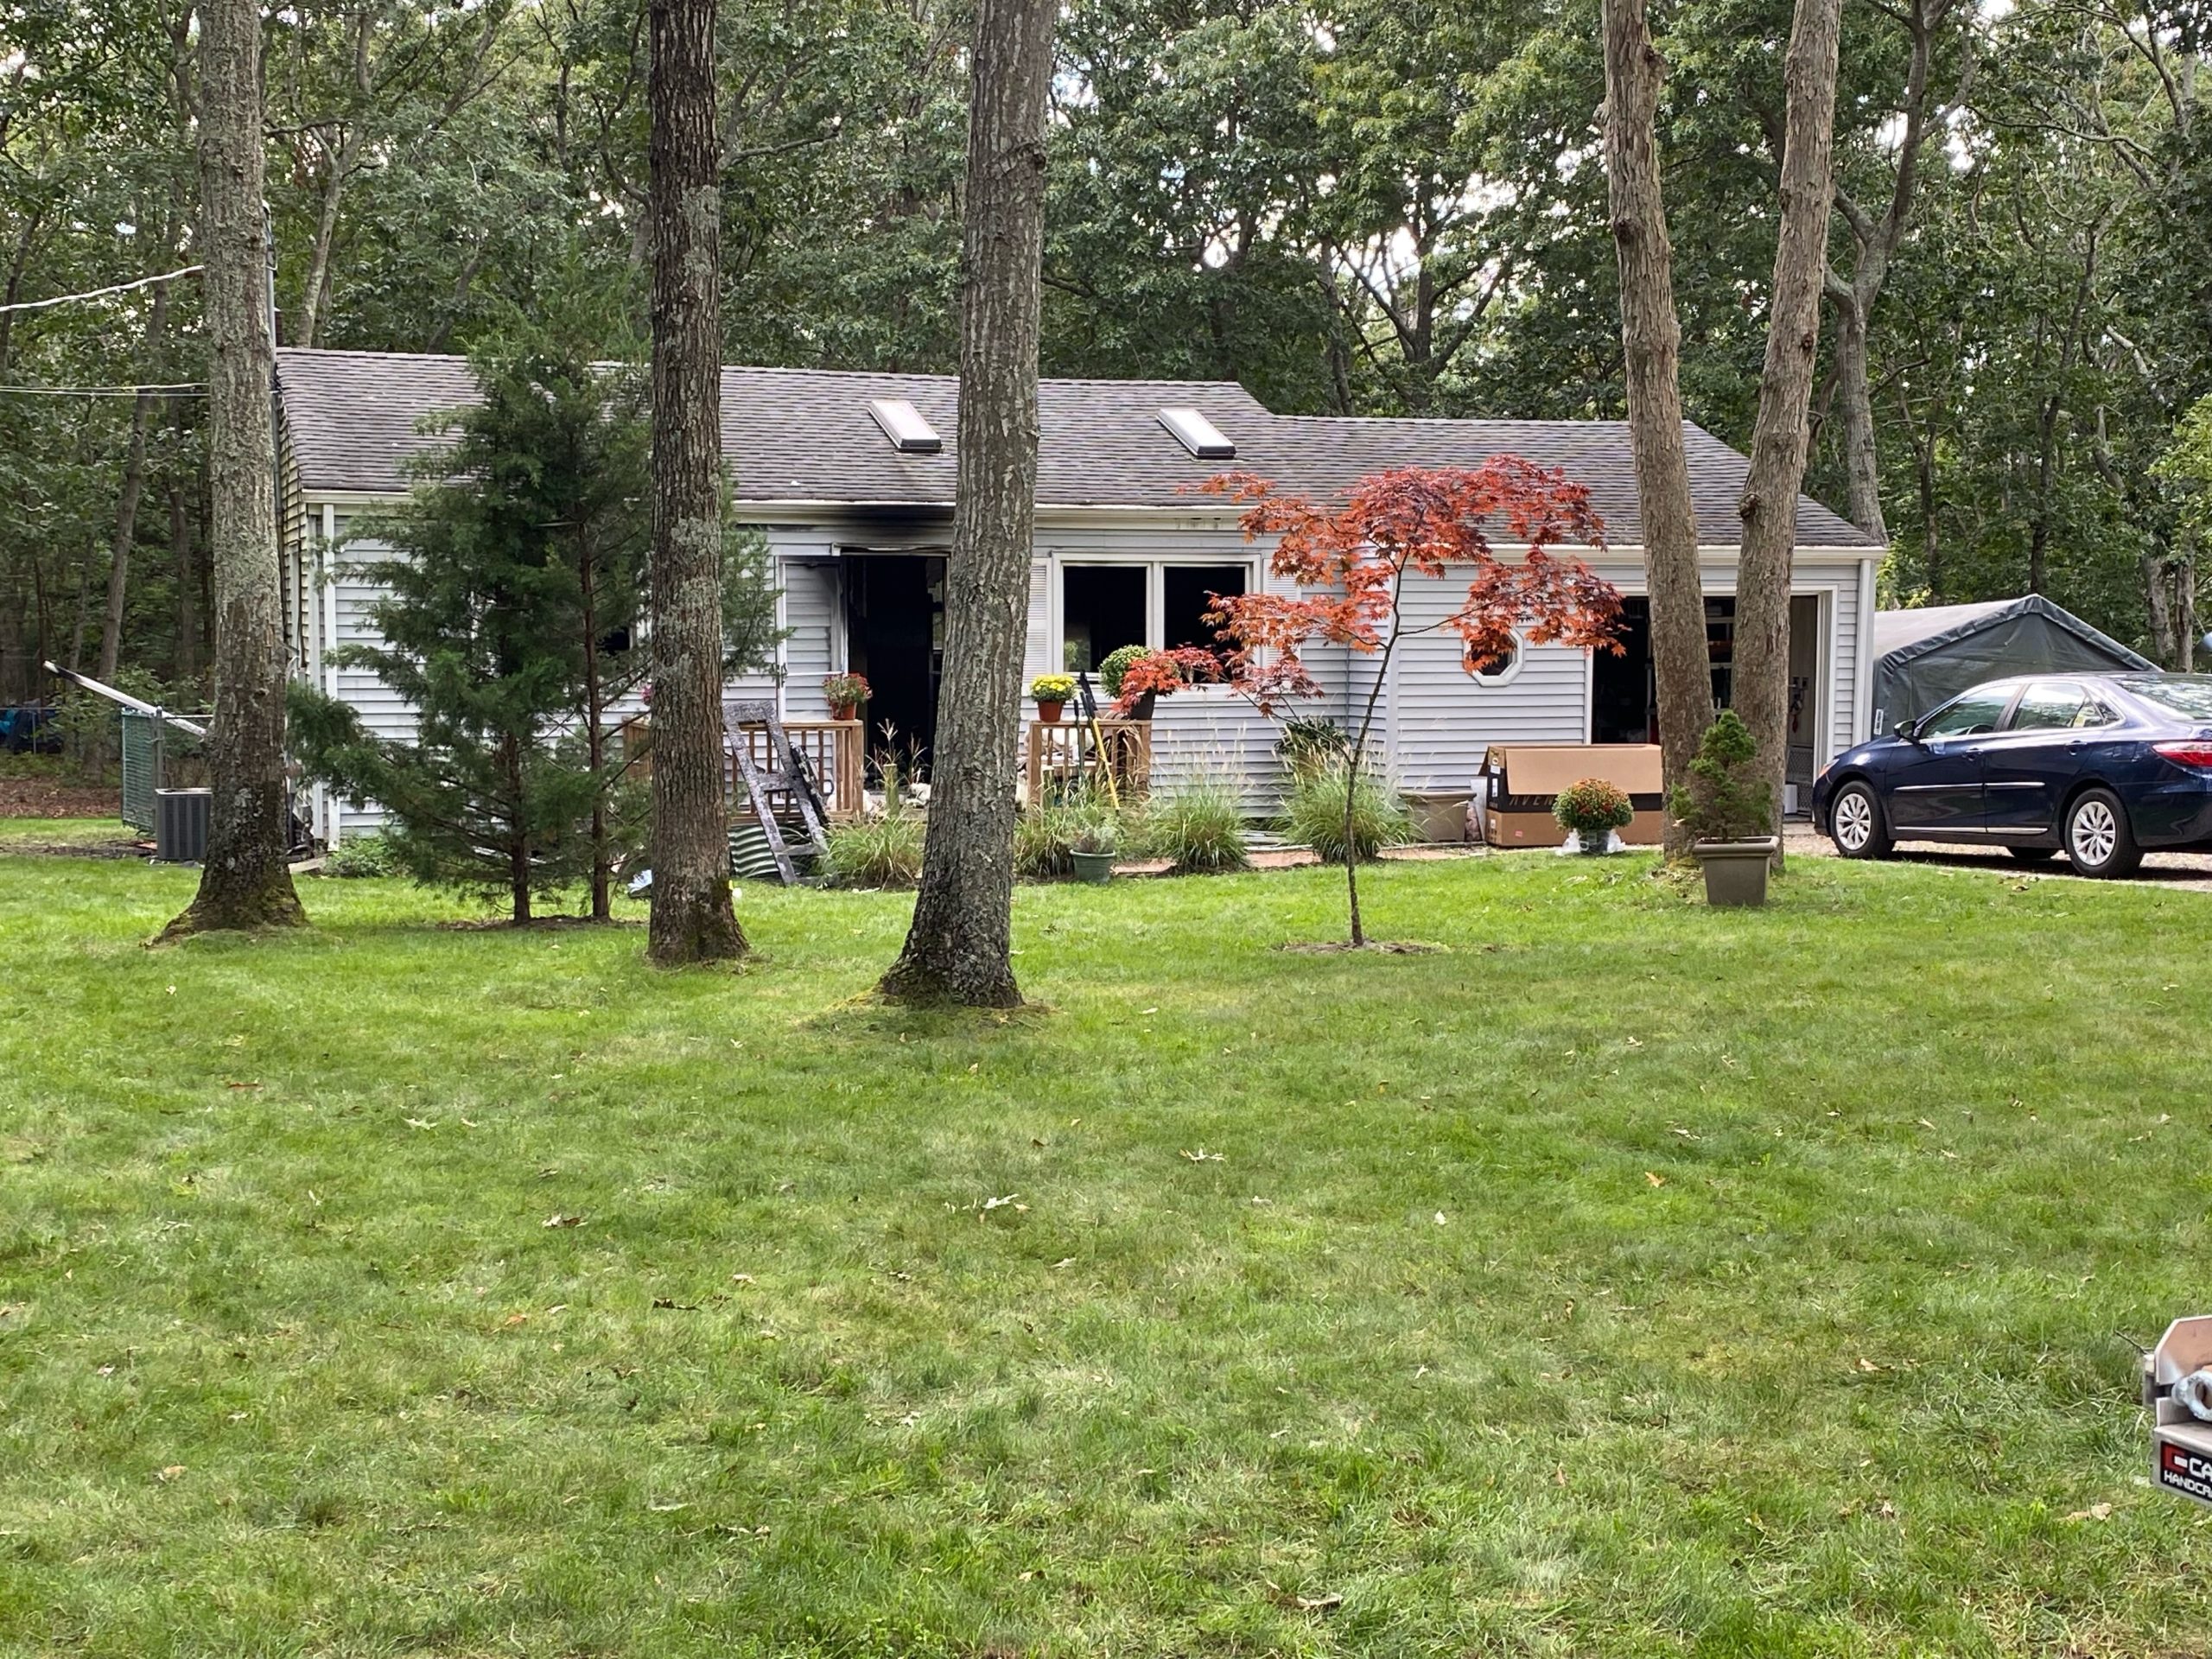 A fire on Bittersweet Avenue in Hampton Bays on Thursday afternoon sent two people to the hospital.